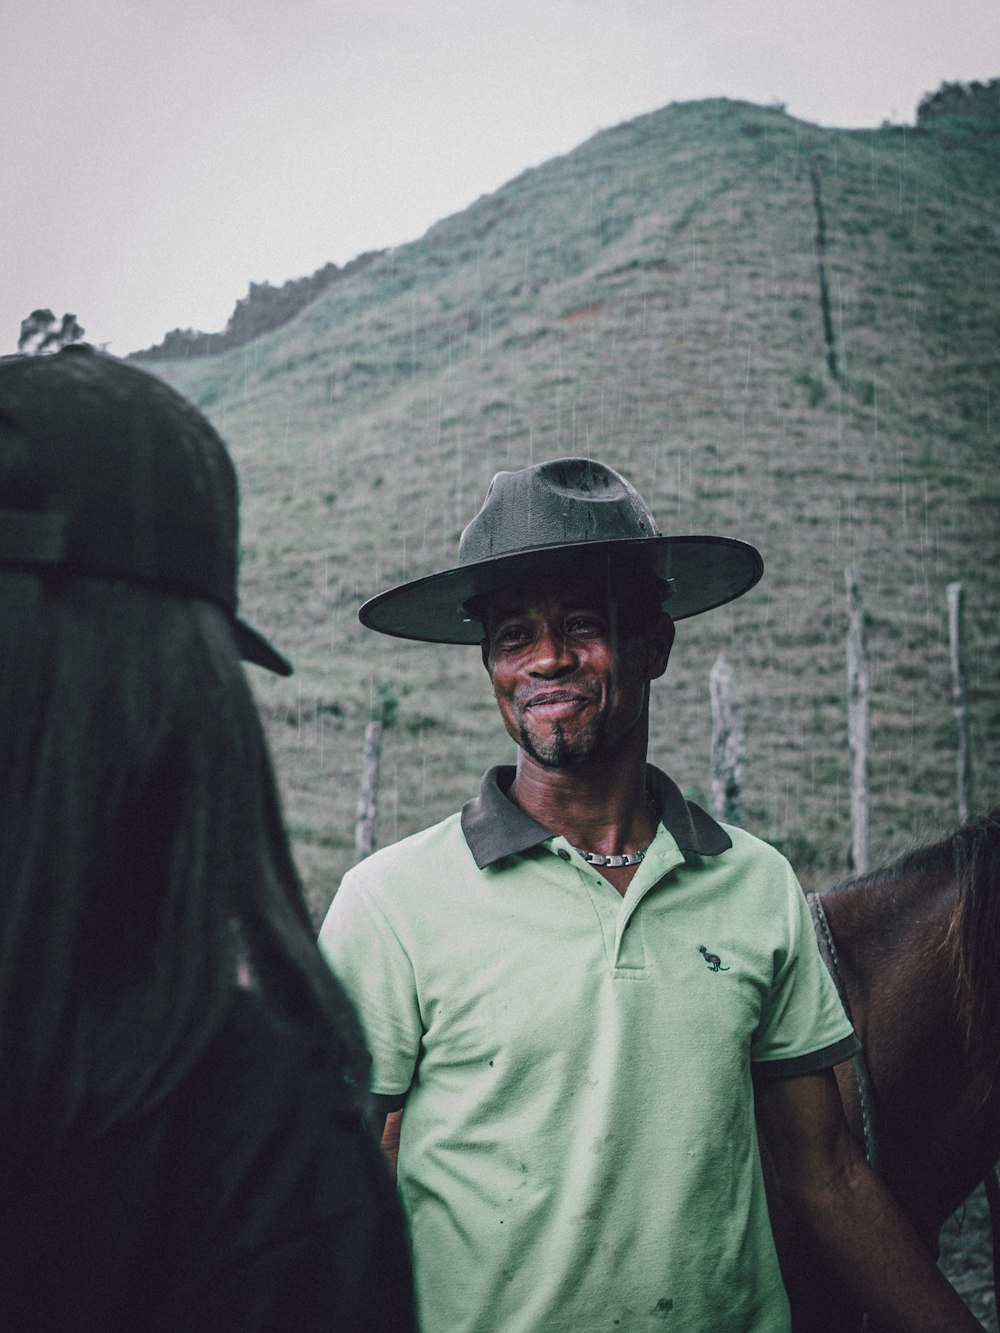 man in green polo shirt wearing black hat standing beside brown horse during daytime